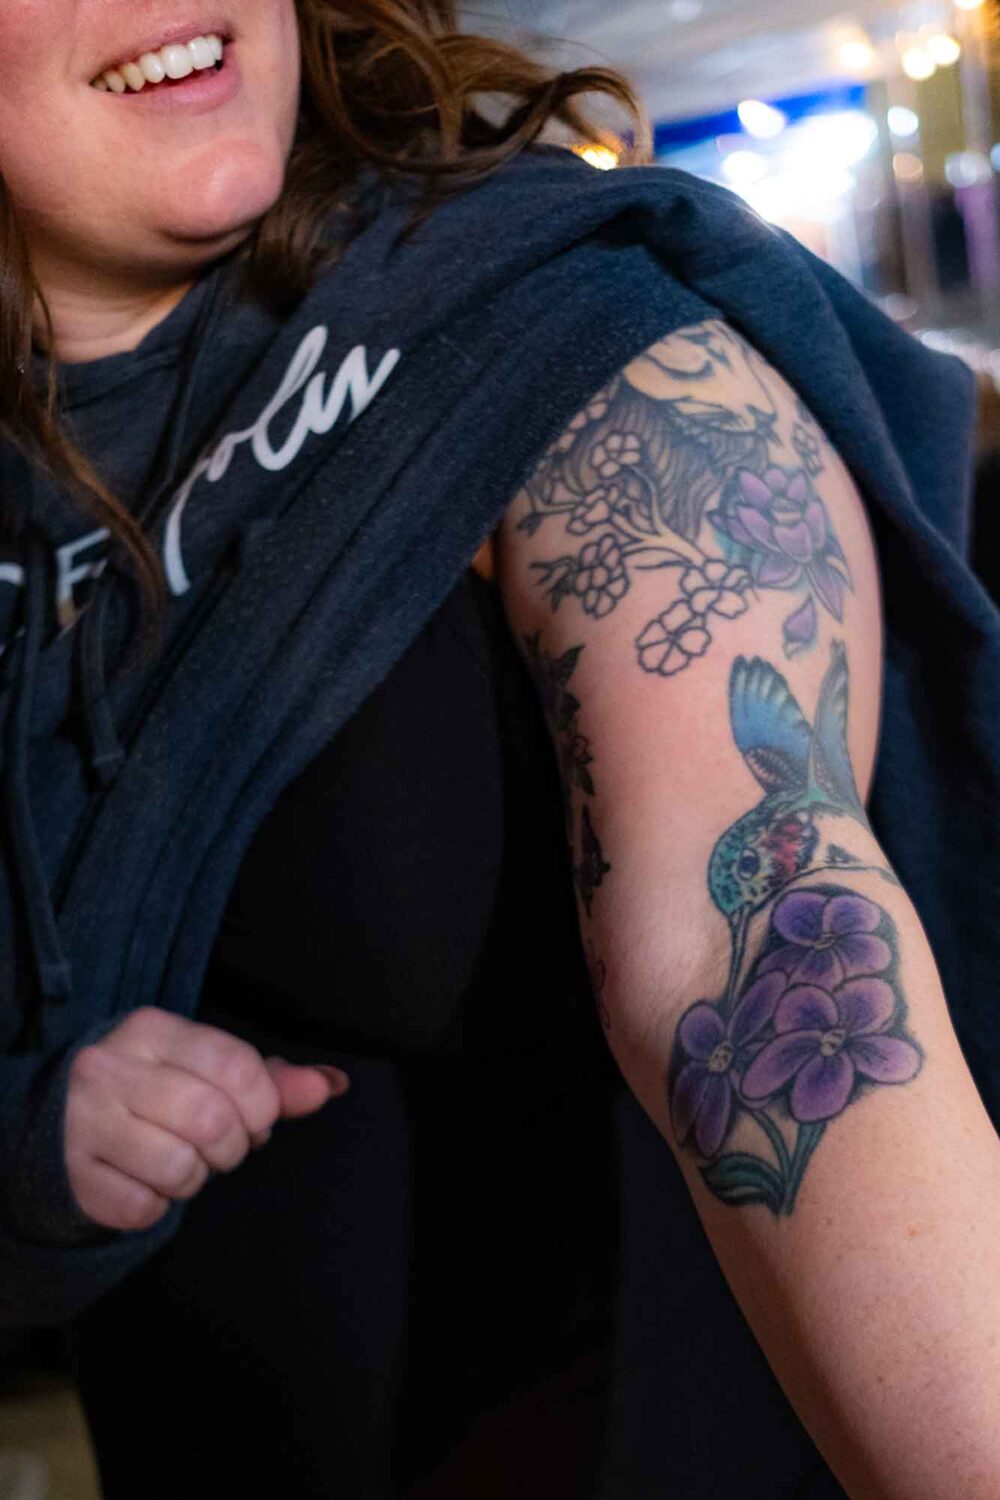 Breanna Jackson lifts her sleeve to show the hummingbird tattoo on her arm